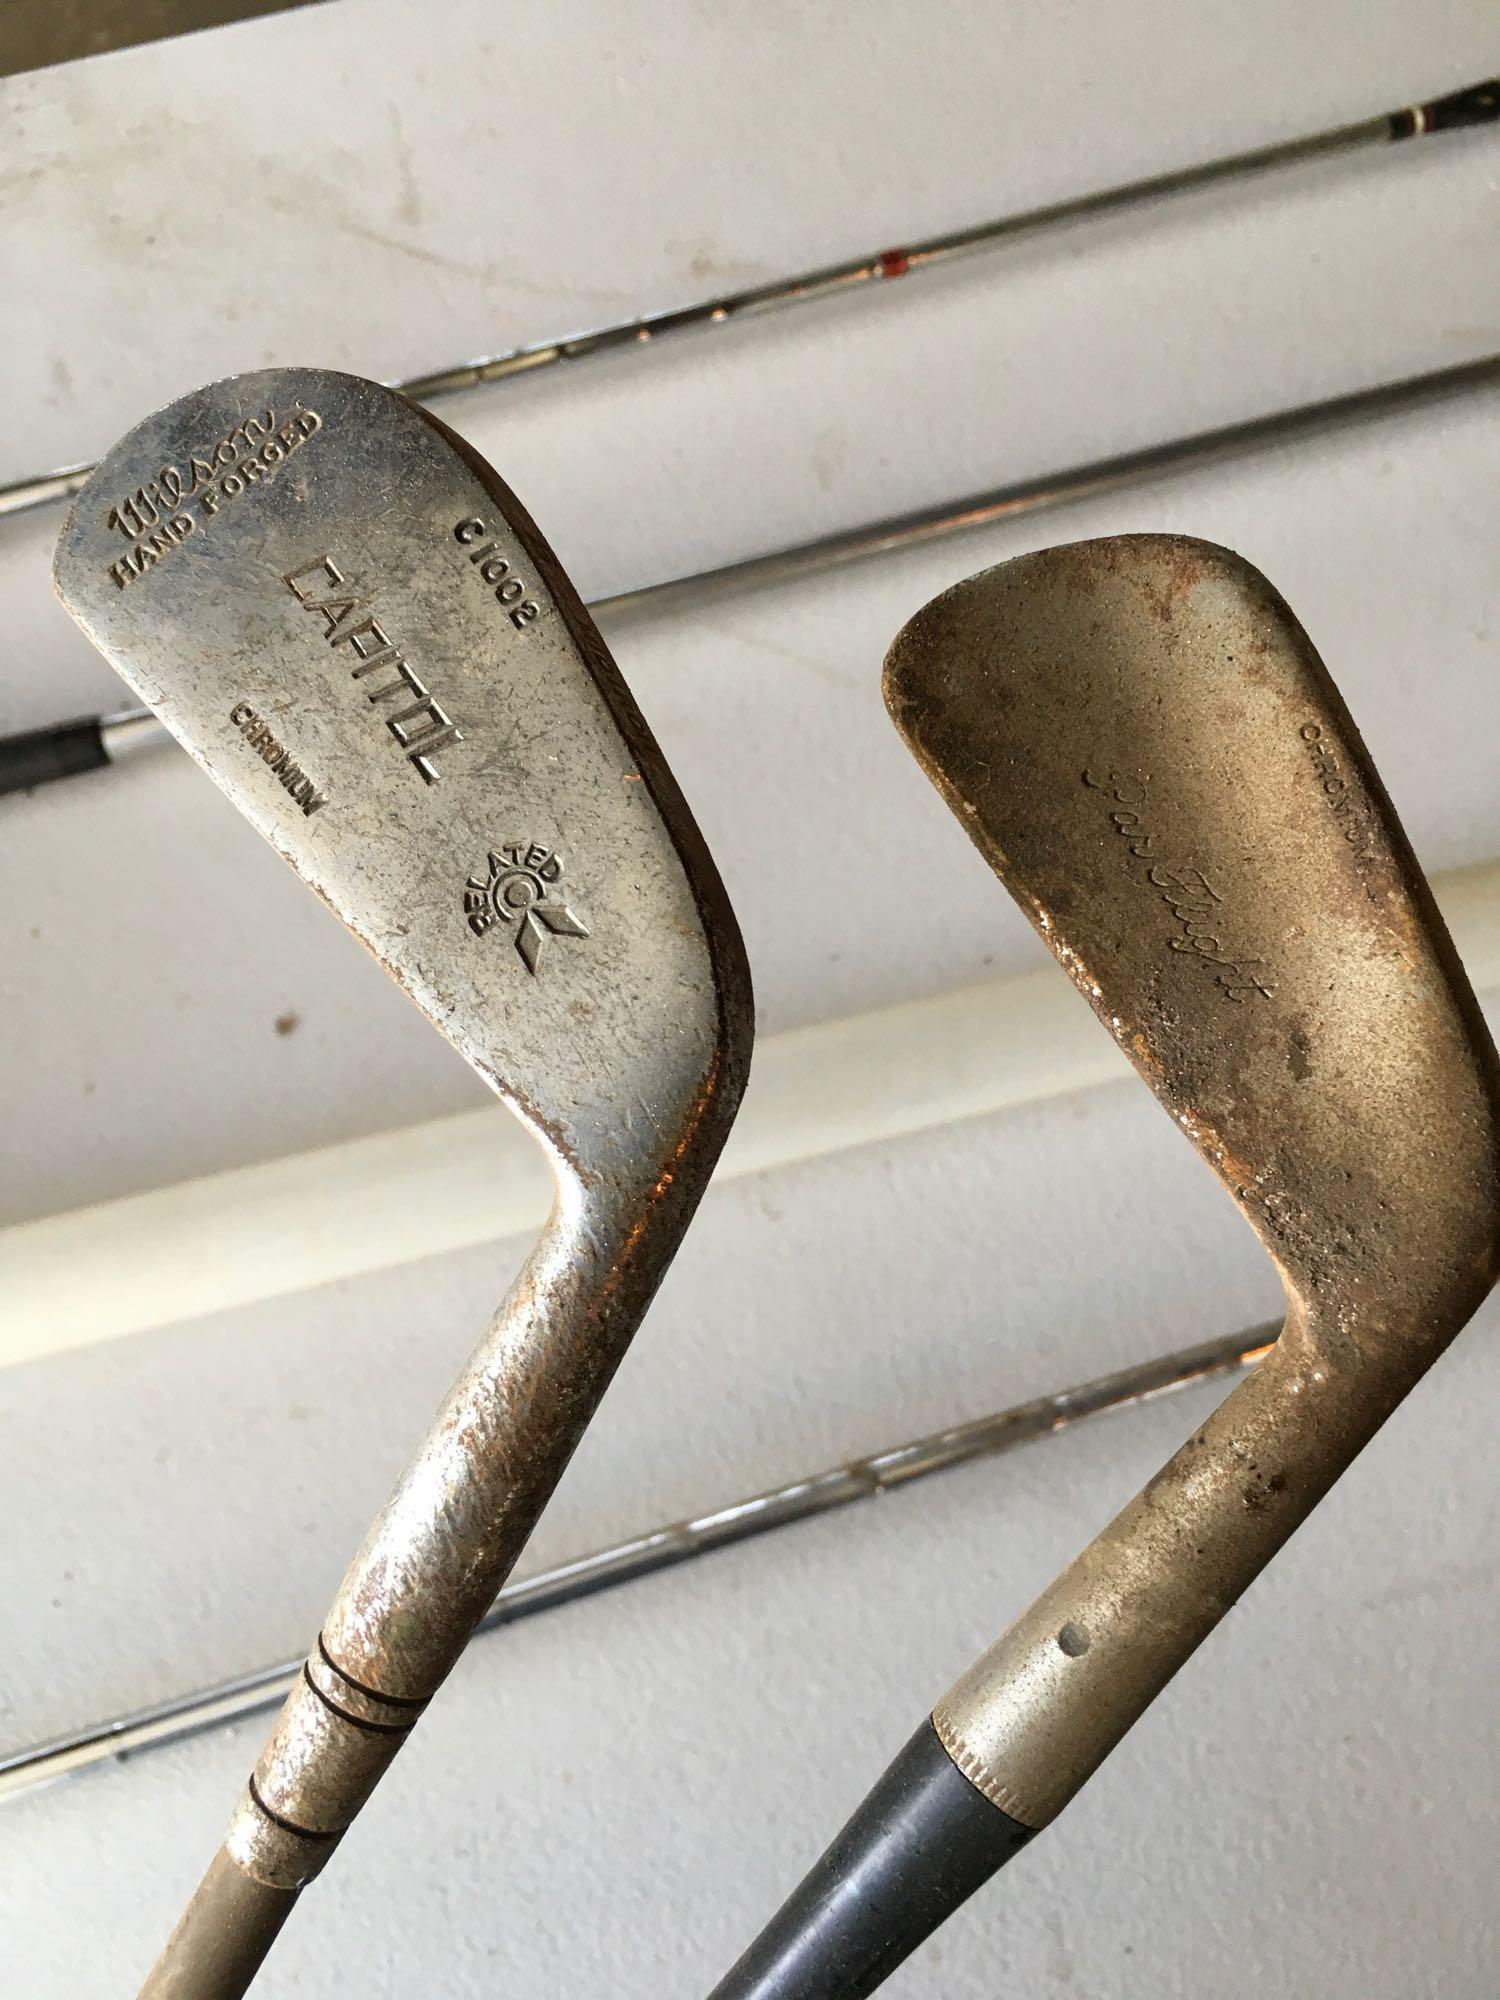 Vintage golf clubs with bag